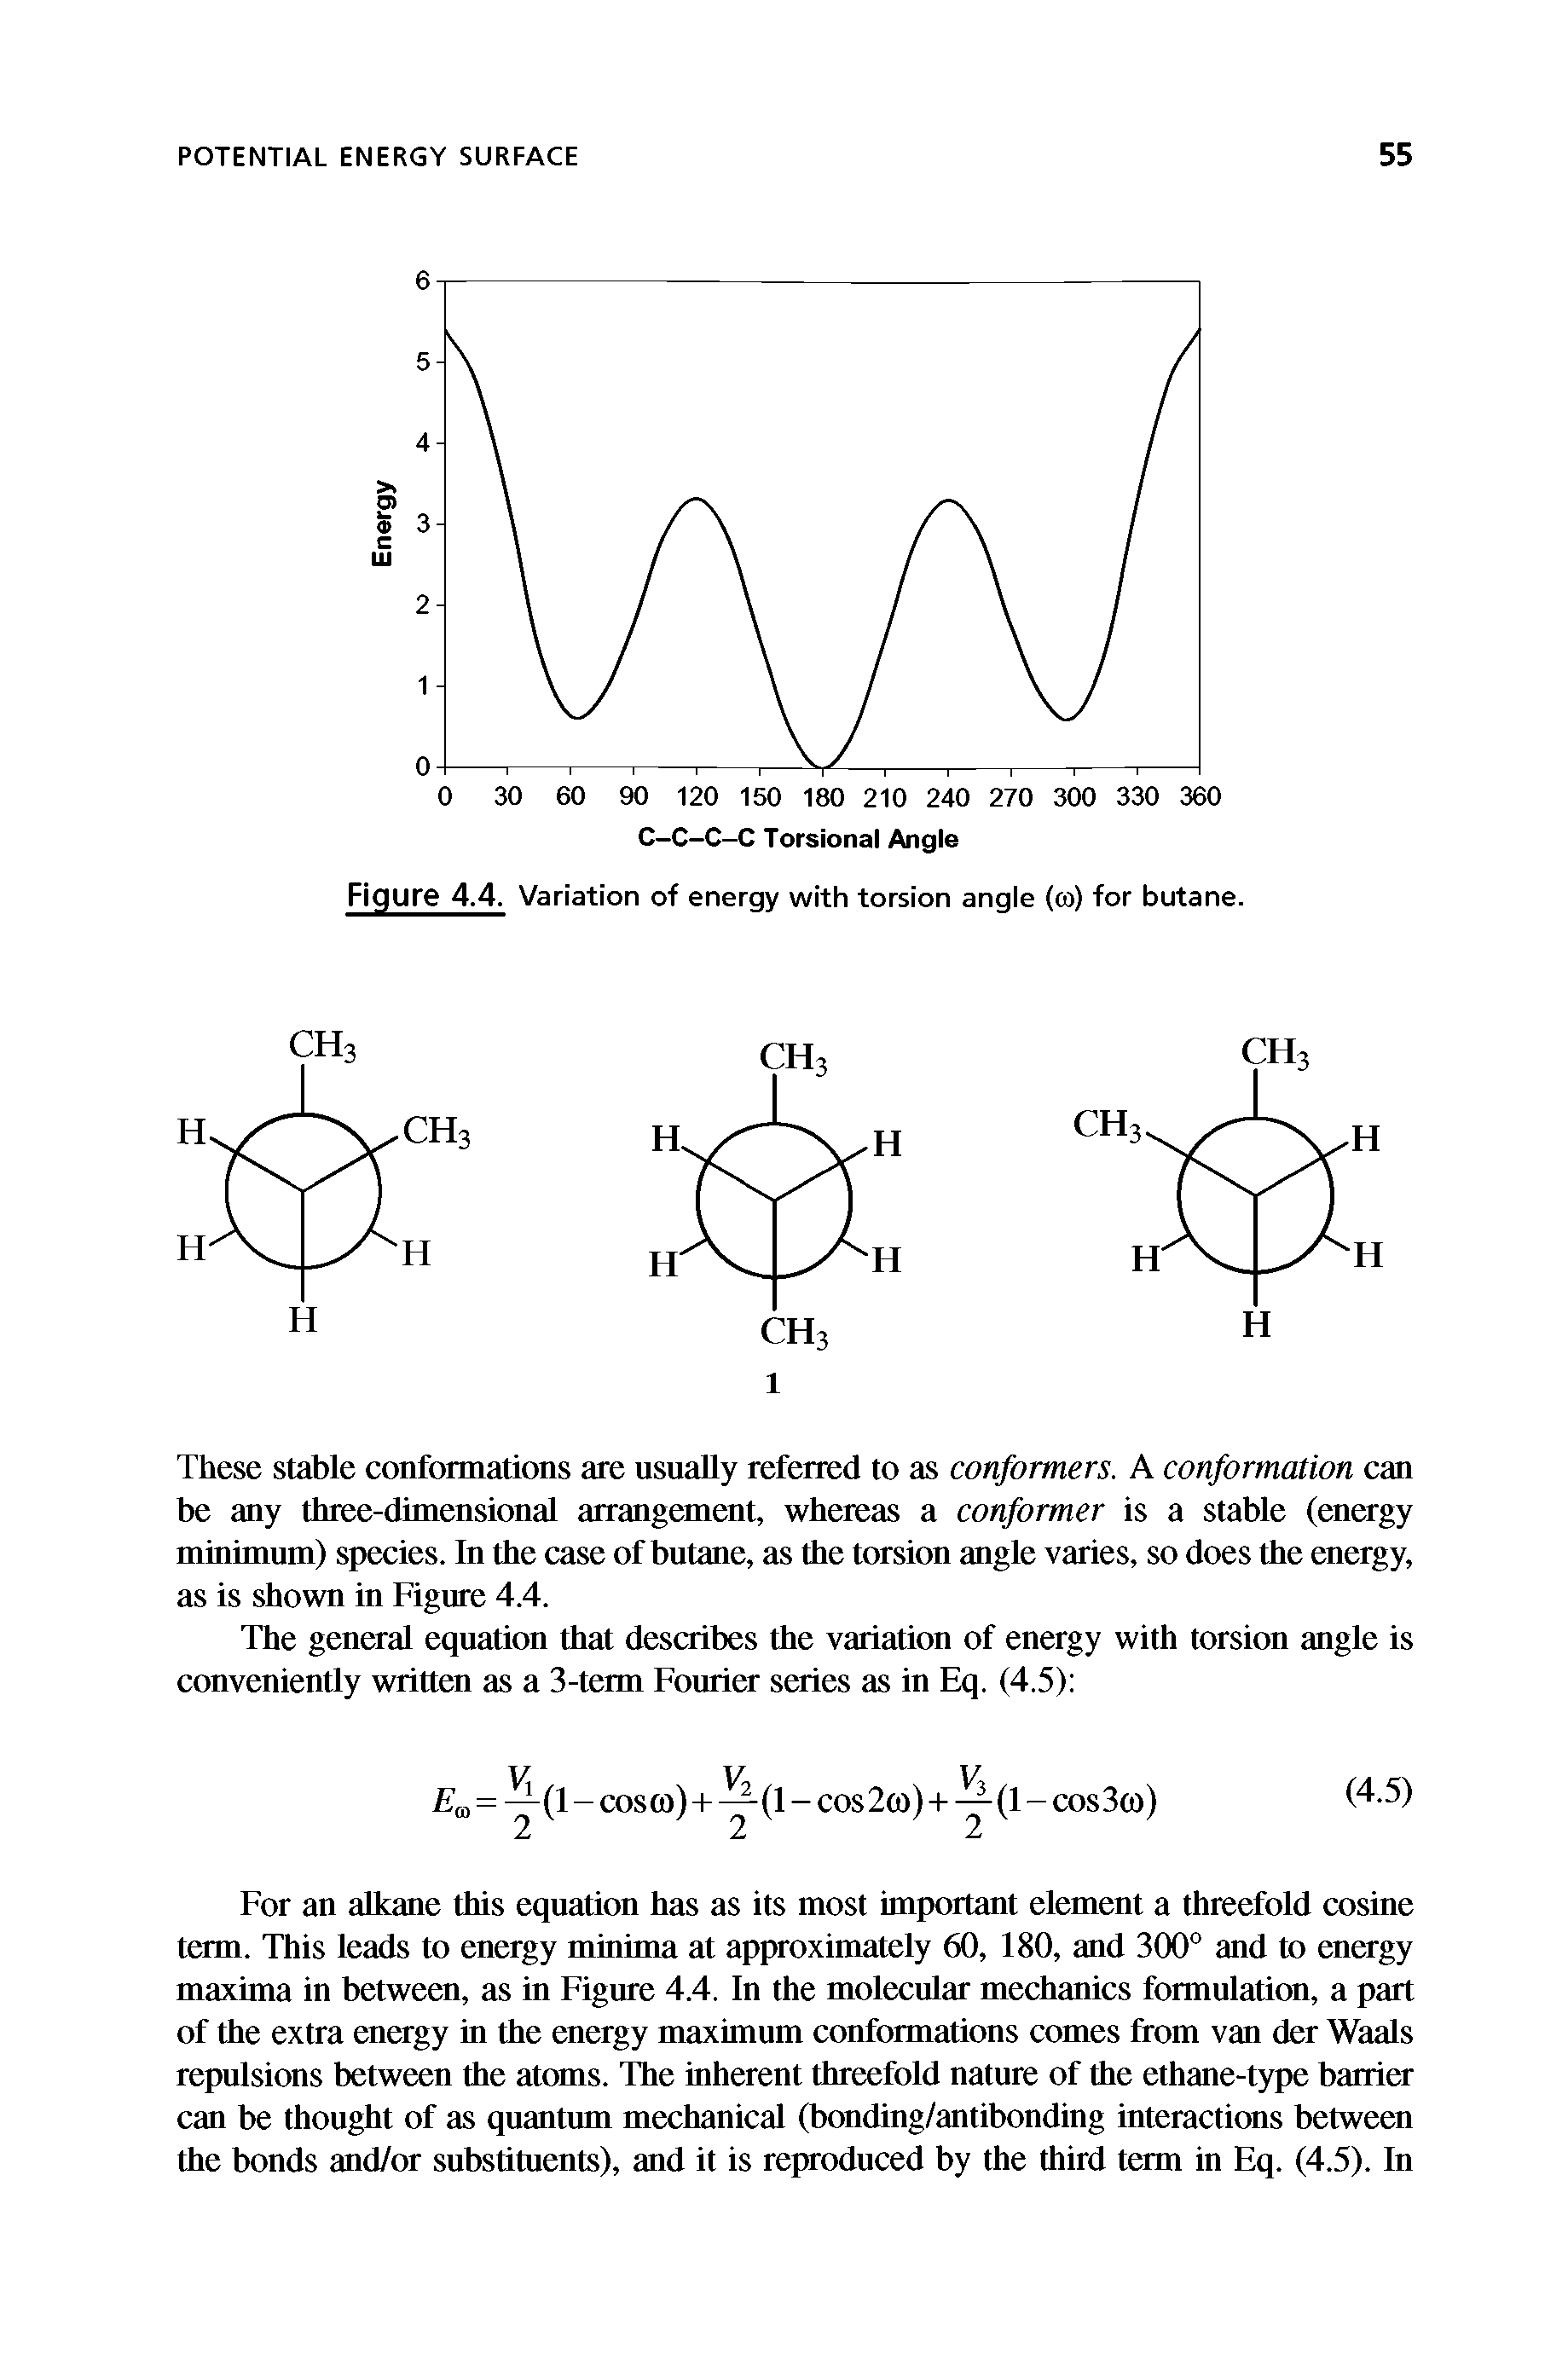 Figure 4.4. Variation of energy with torsion angle (co) for butane.